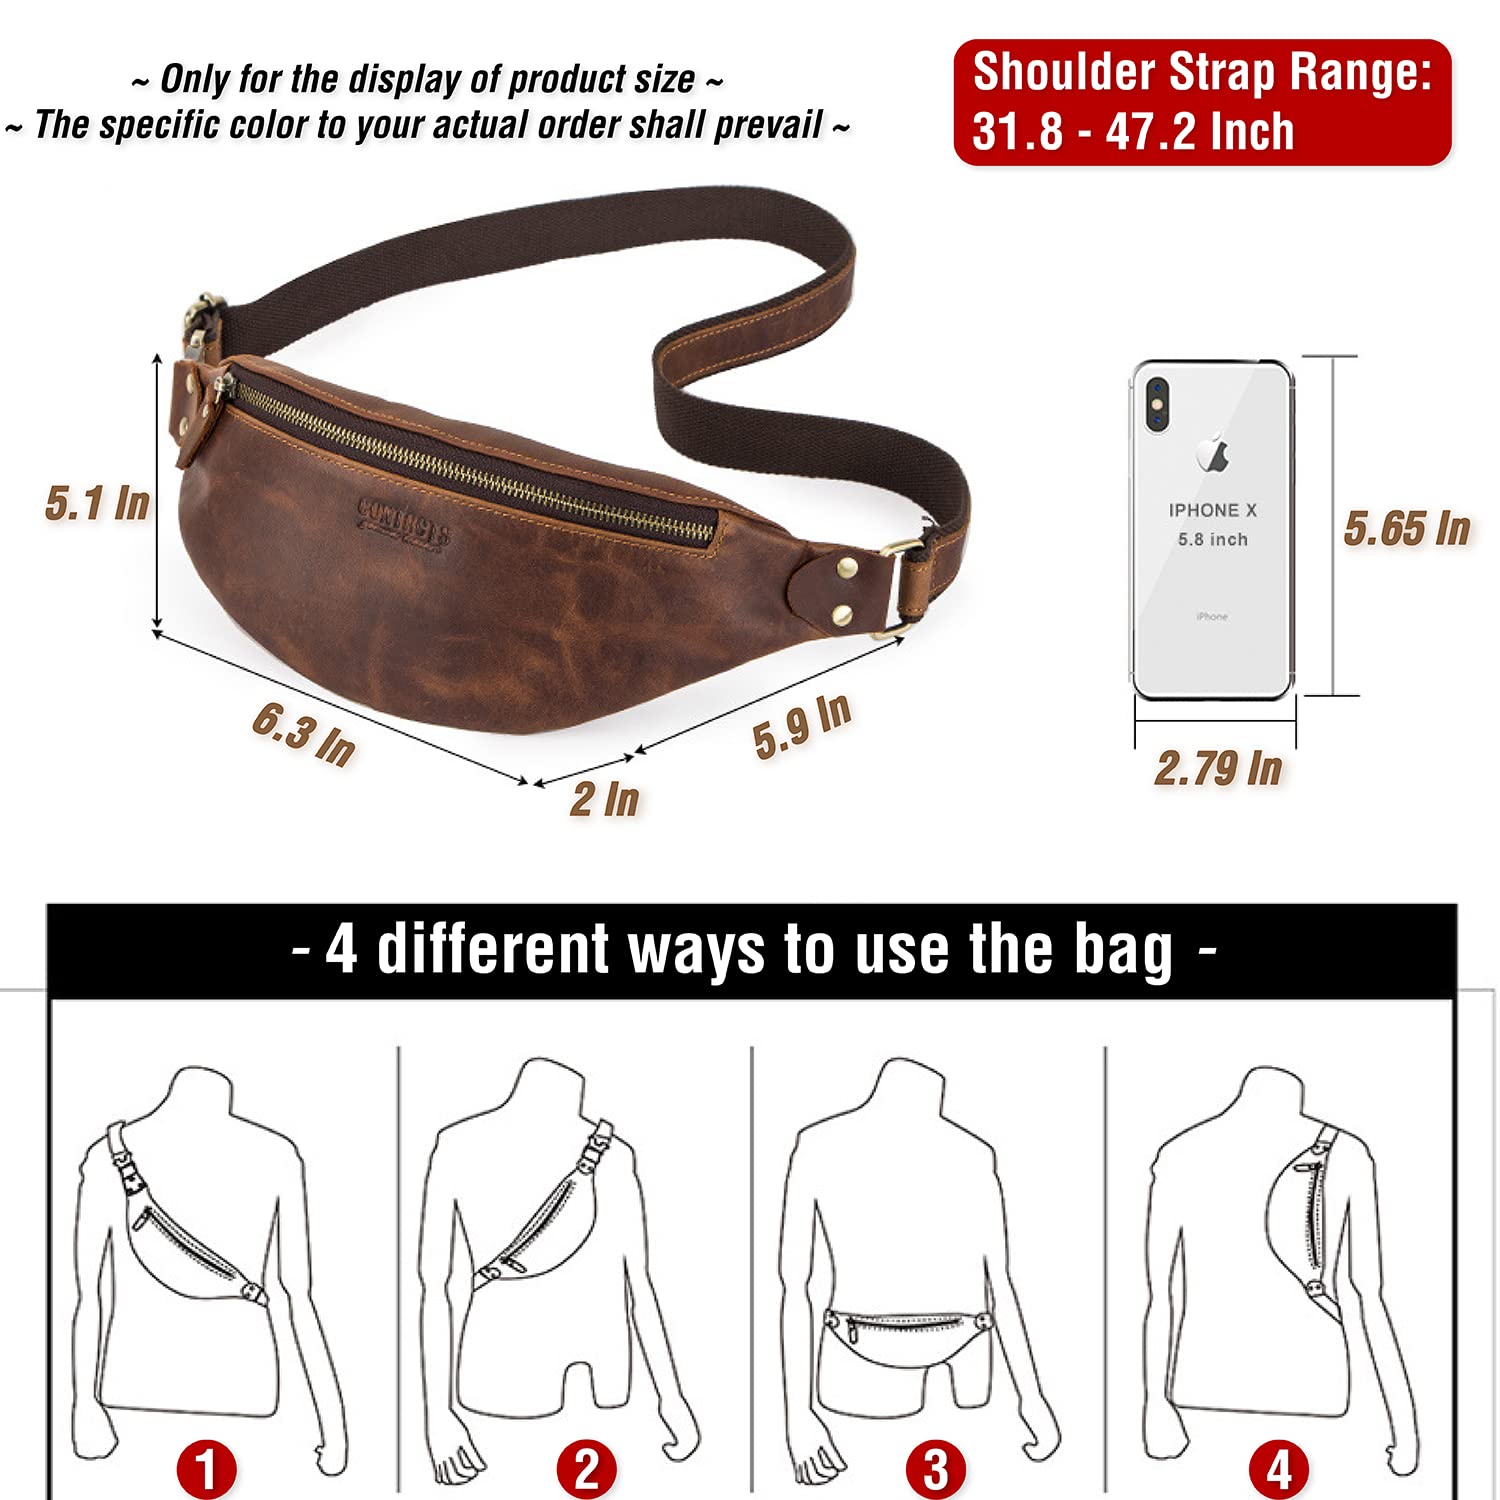 Top Grain Genuine Leather Slim Waist Pack for Man & Woman, Minimalist Vintage Design, Handmade with Detachable Hardware, Slim Fanny Pack Small Crossbody Belt Bag for Traveling or Riding, Coffee